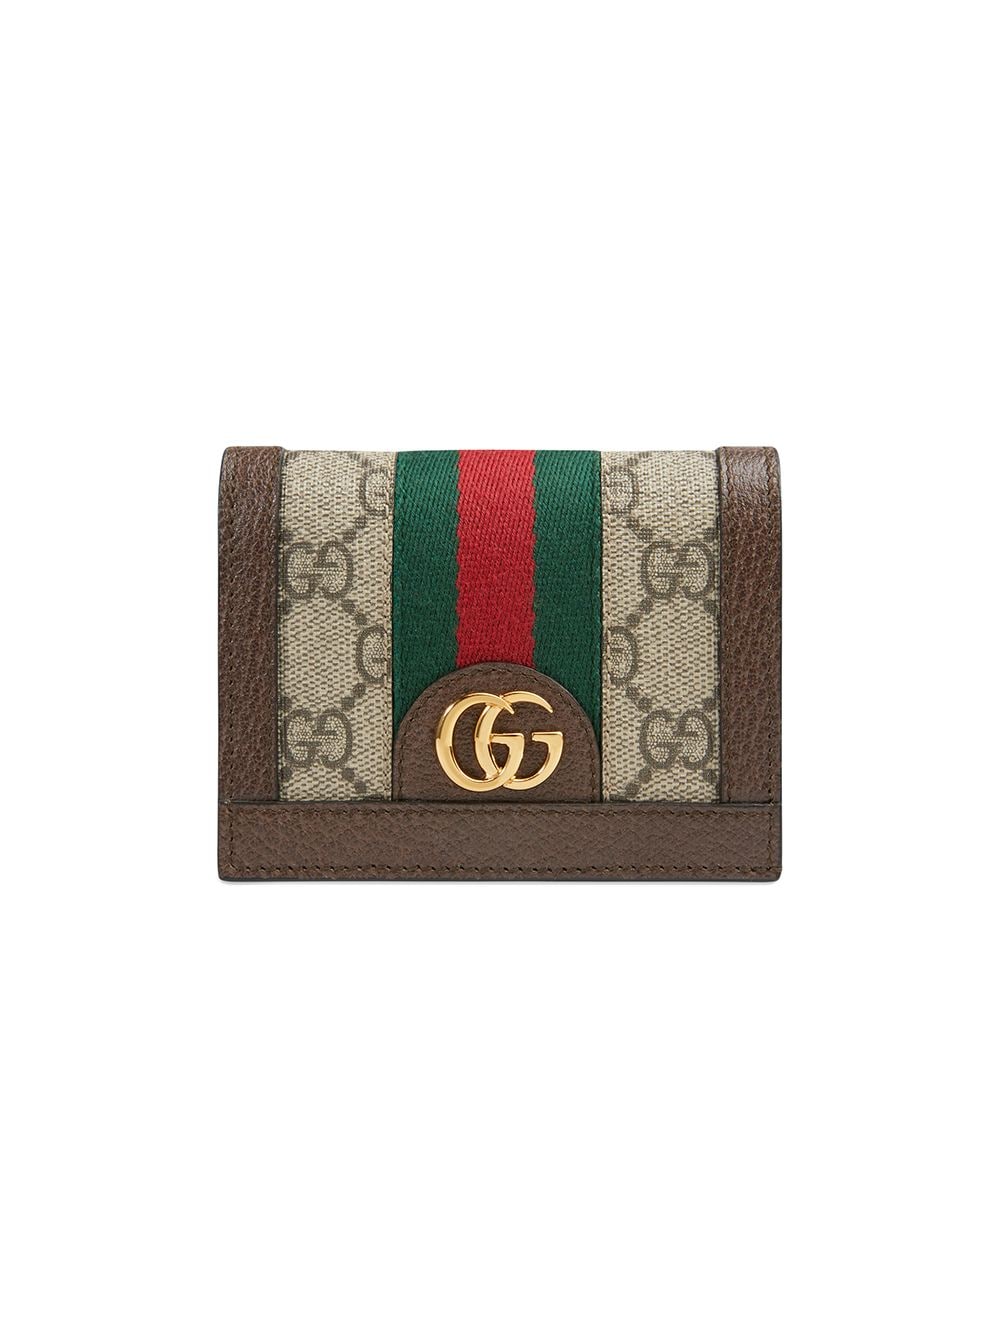 GUCCI OPHIDIA GG SUPREME FABRIC WALLET